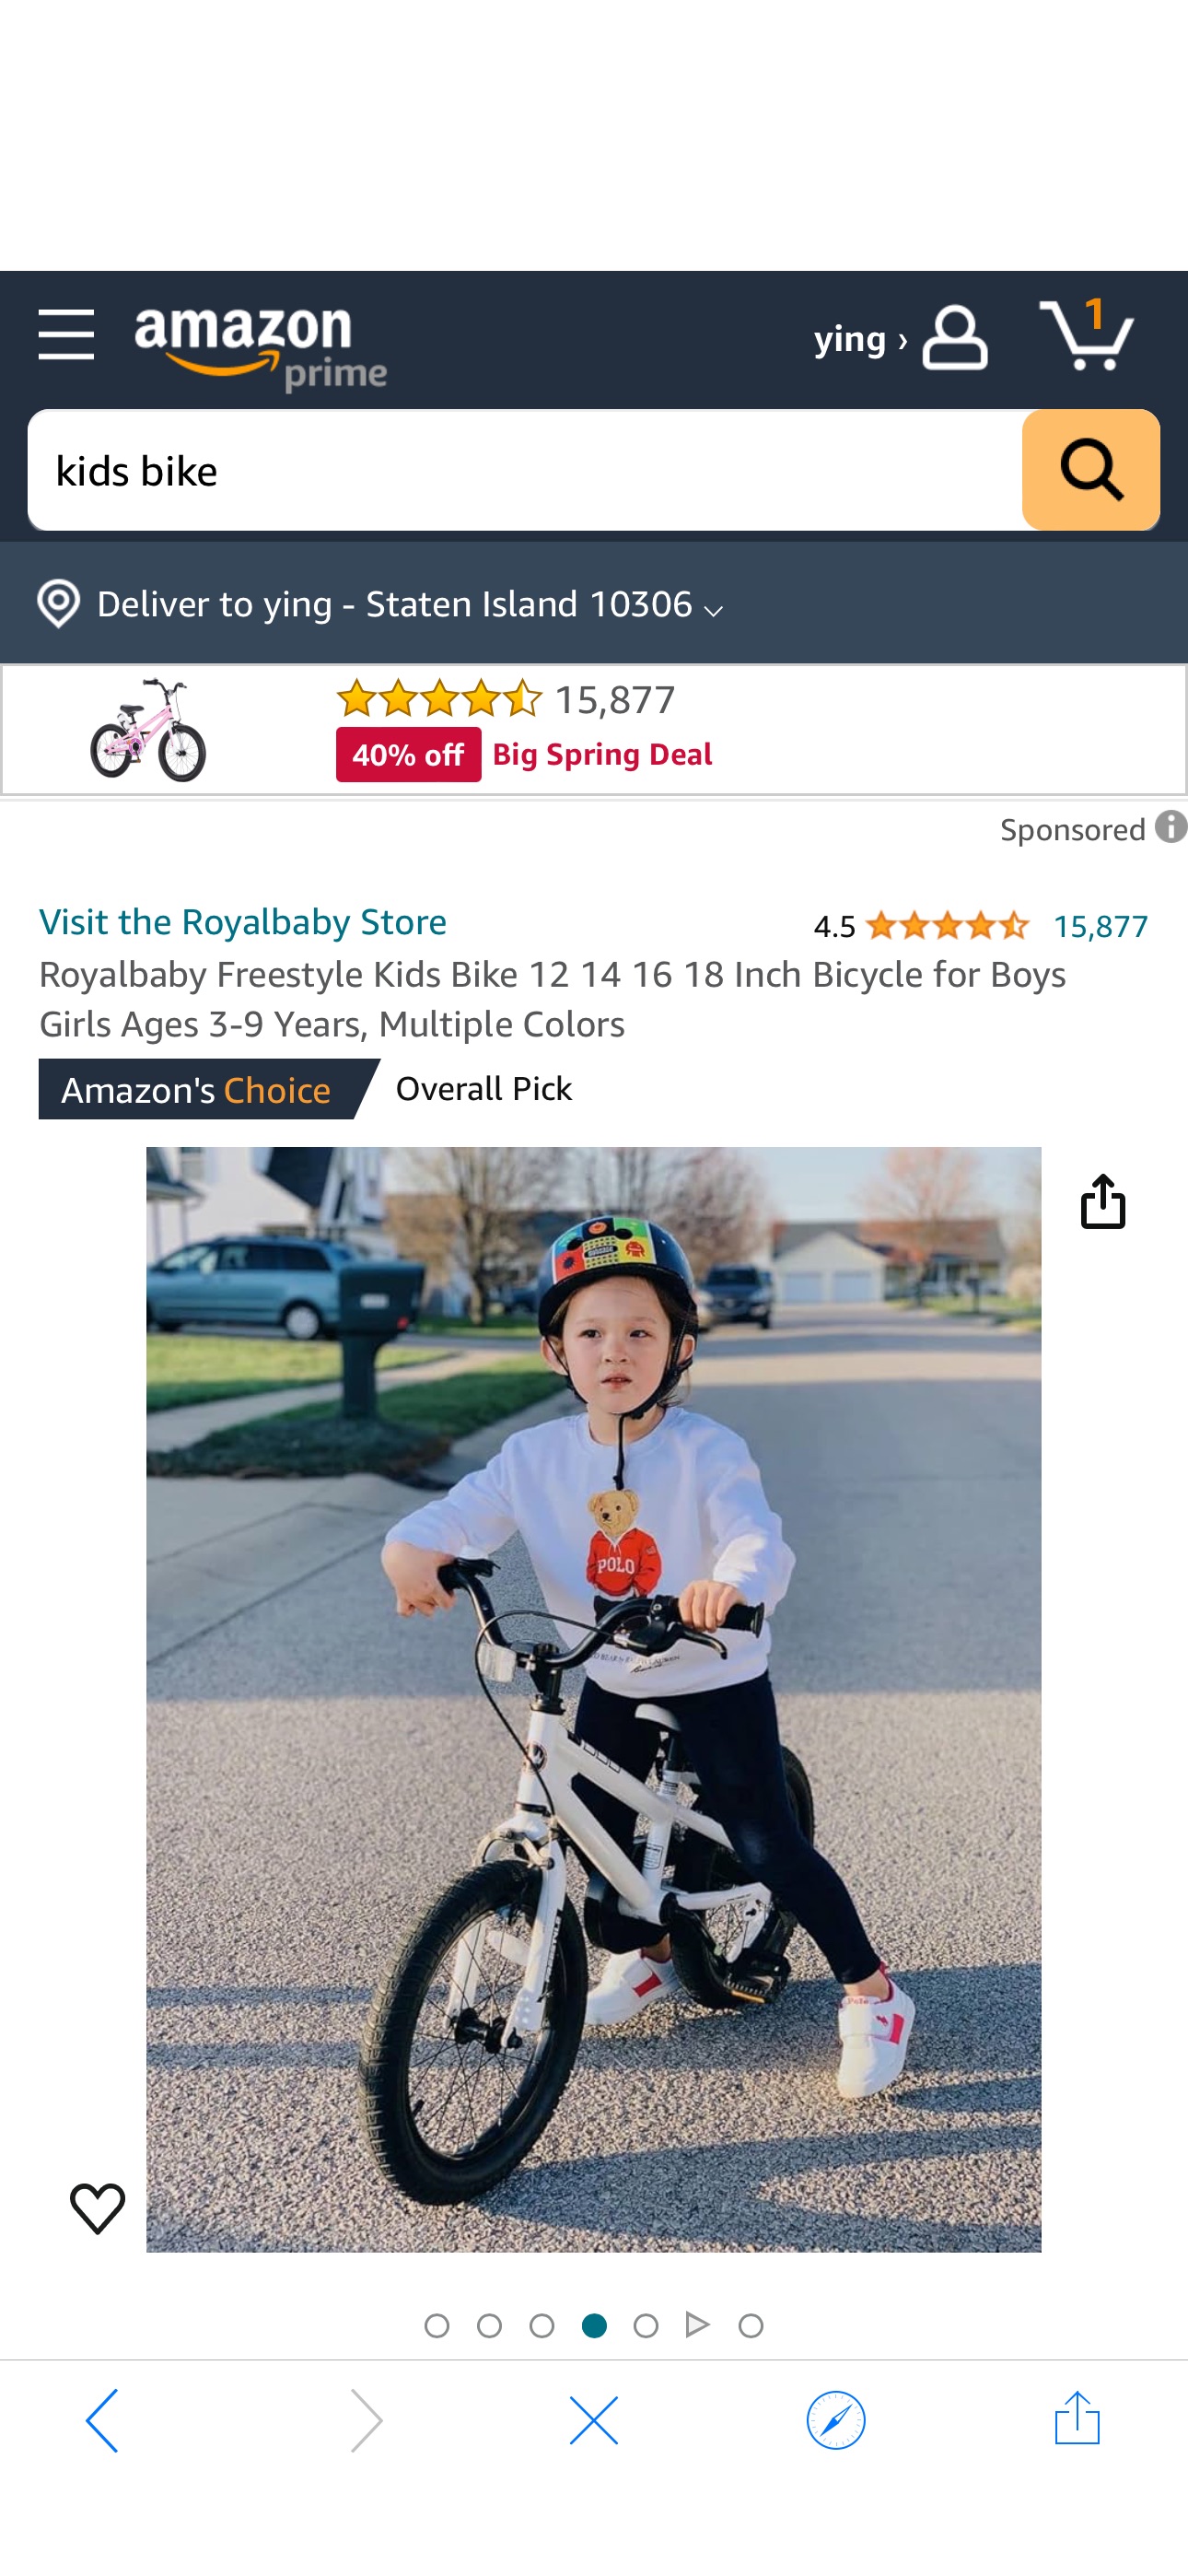 Amazon.com : RoyalBaby Freestyle Kids Bike Boys Girls 16 Inch BMX Childrens Bicycle with Training Wheels & Kickstand for Ages 4-7 years, White : Sports & Outdoors